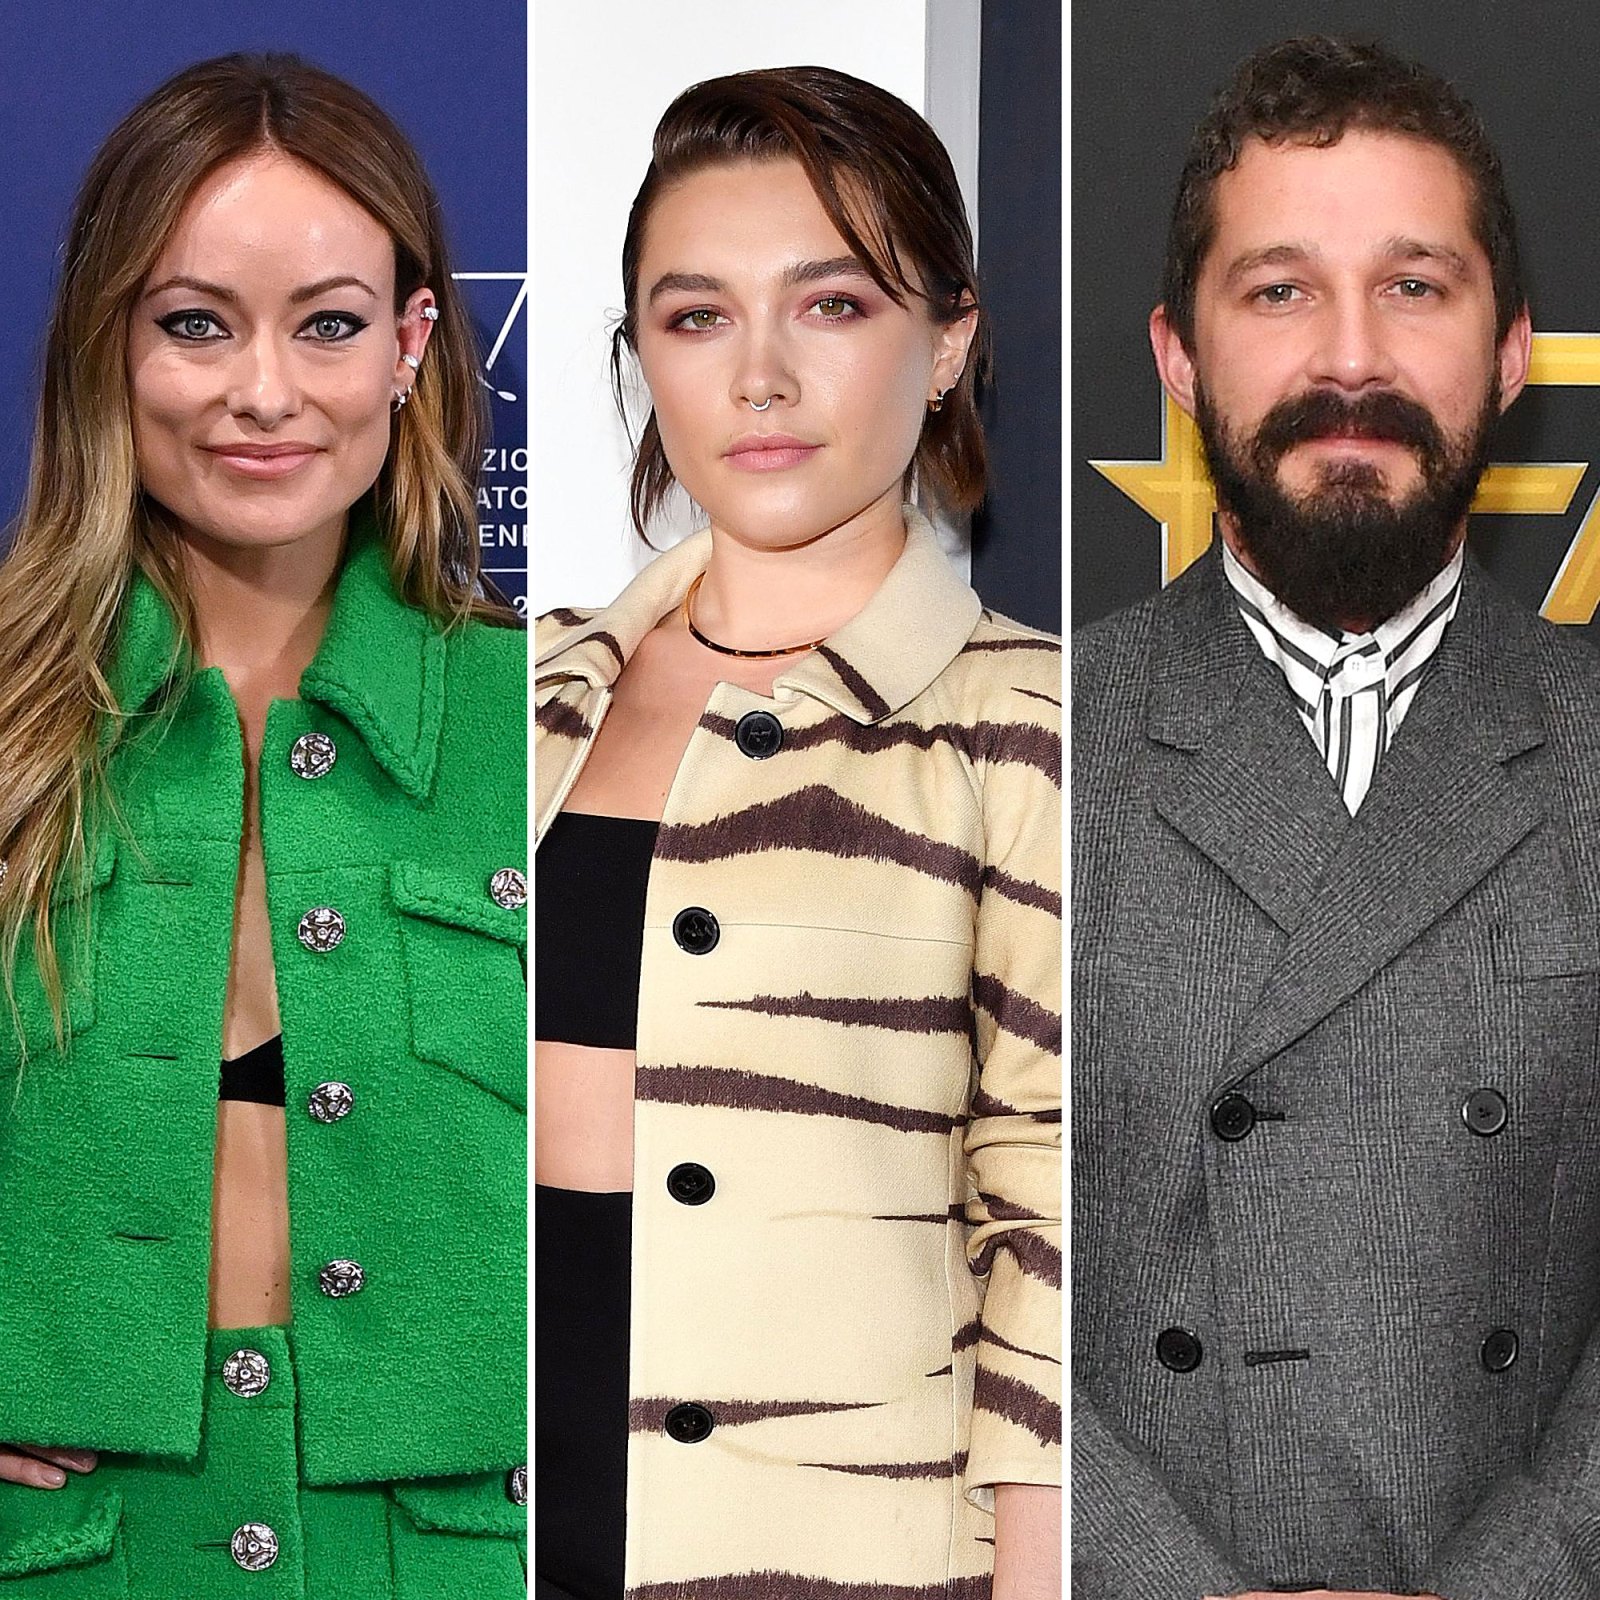 Olivia Wilde Dodges Florence Pugh, Shia LaBeouf Questions at Film Event